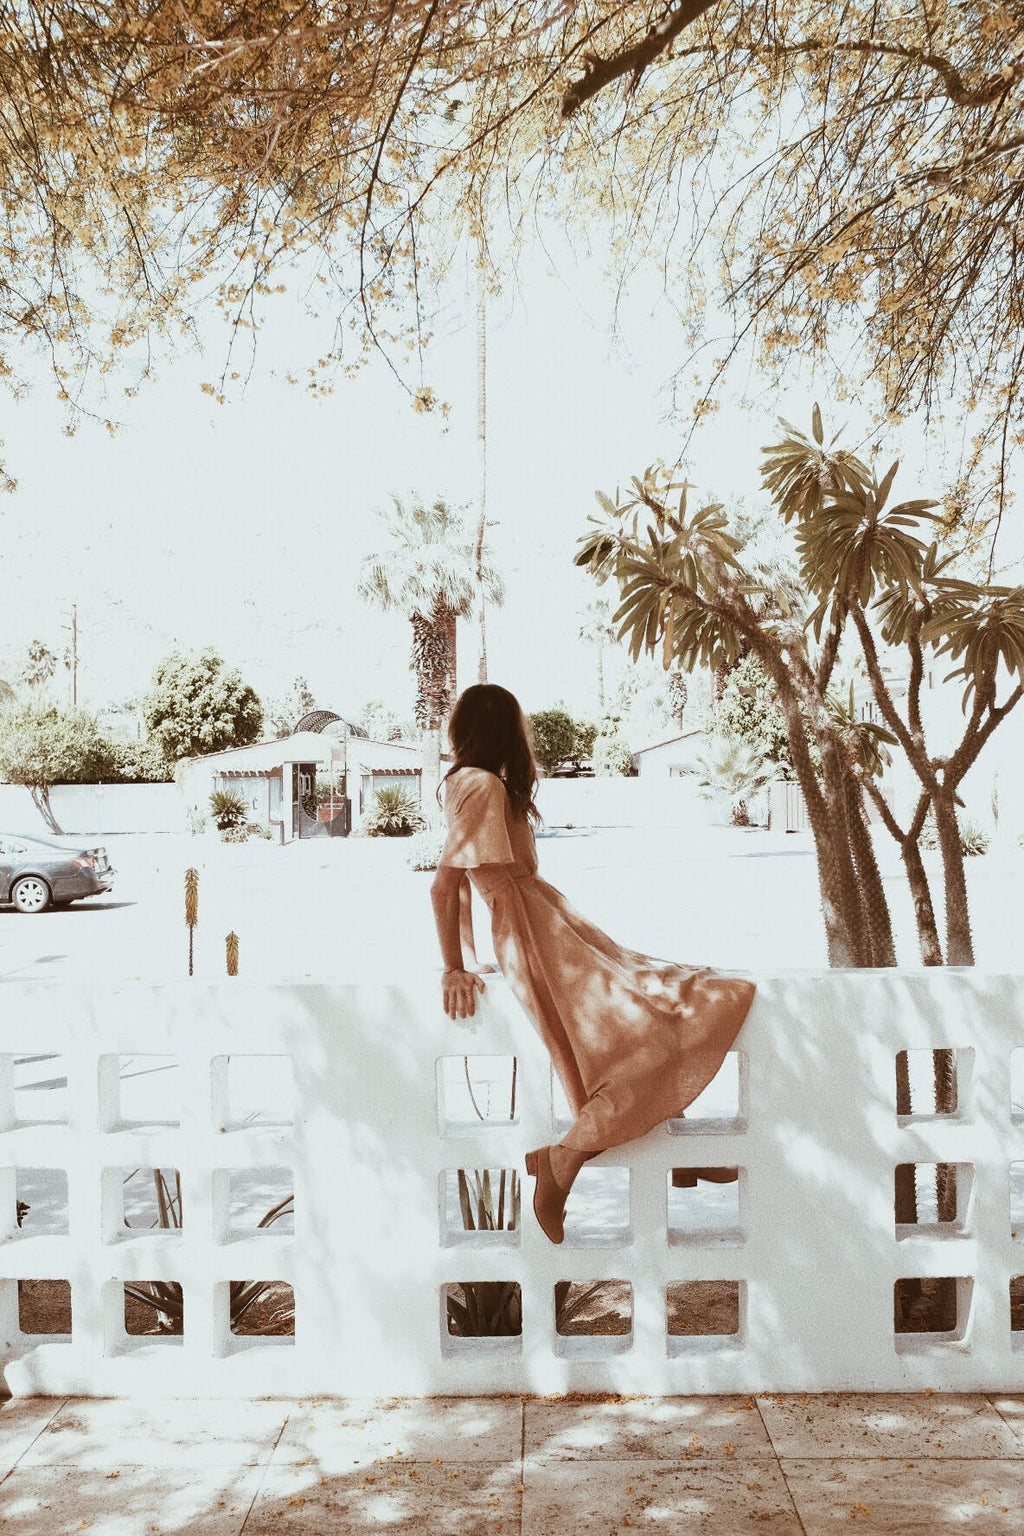 Back view of a woman wearing toasted peach maxi dress sitting on a white fence